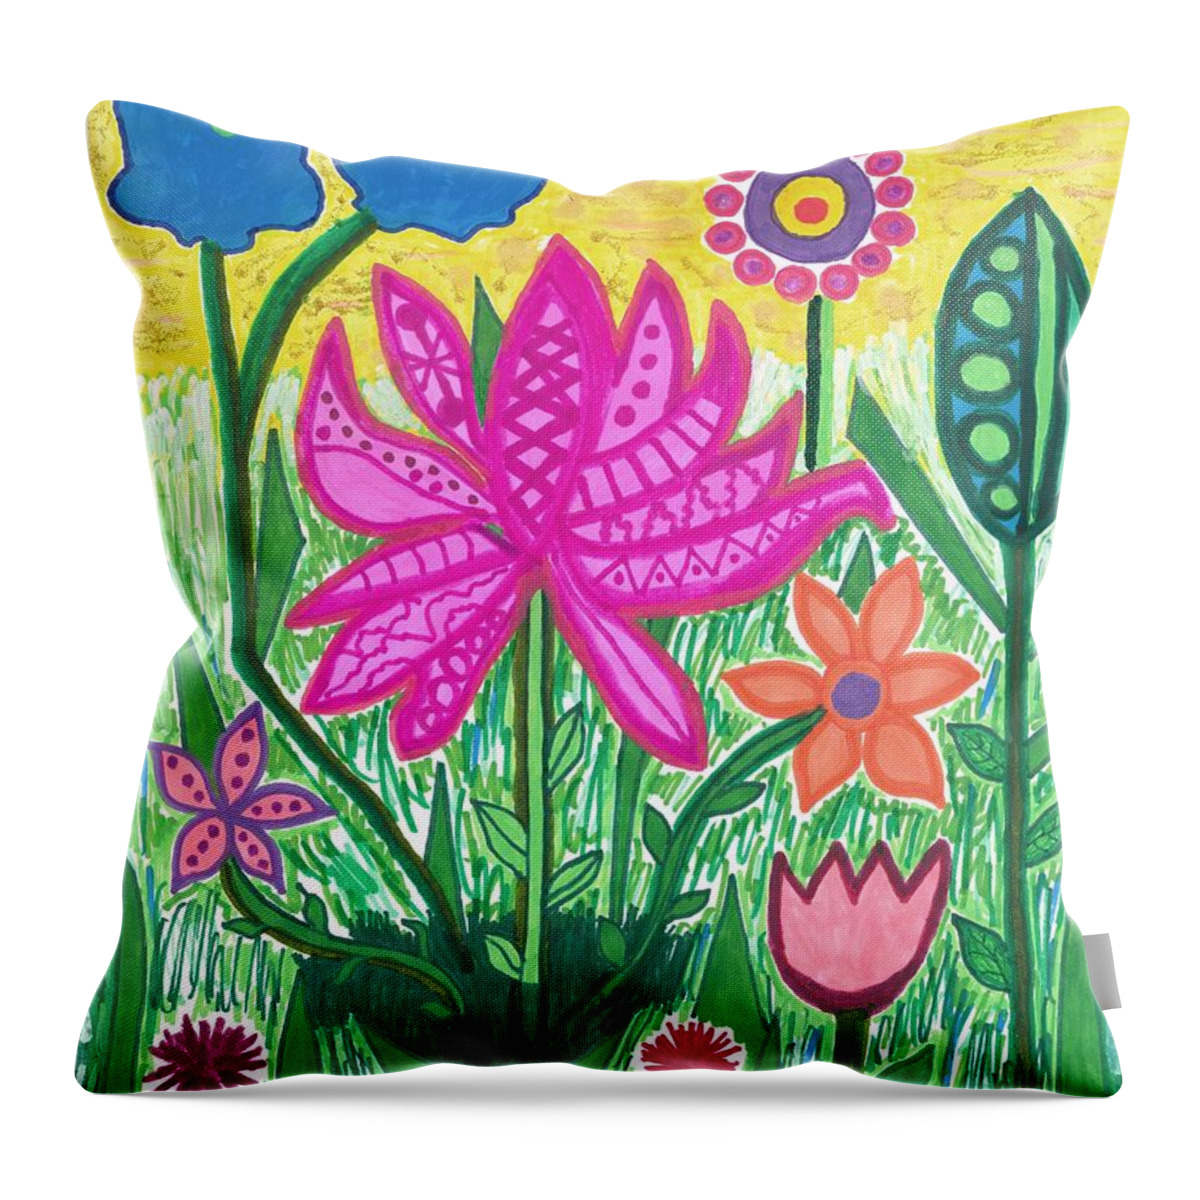 Original Drawing/painting Throw Pillow featuring the drawing Springtime Welcome by Susan Schanerman